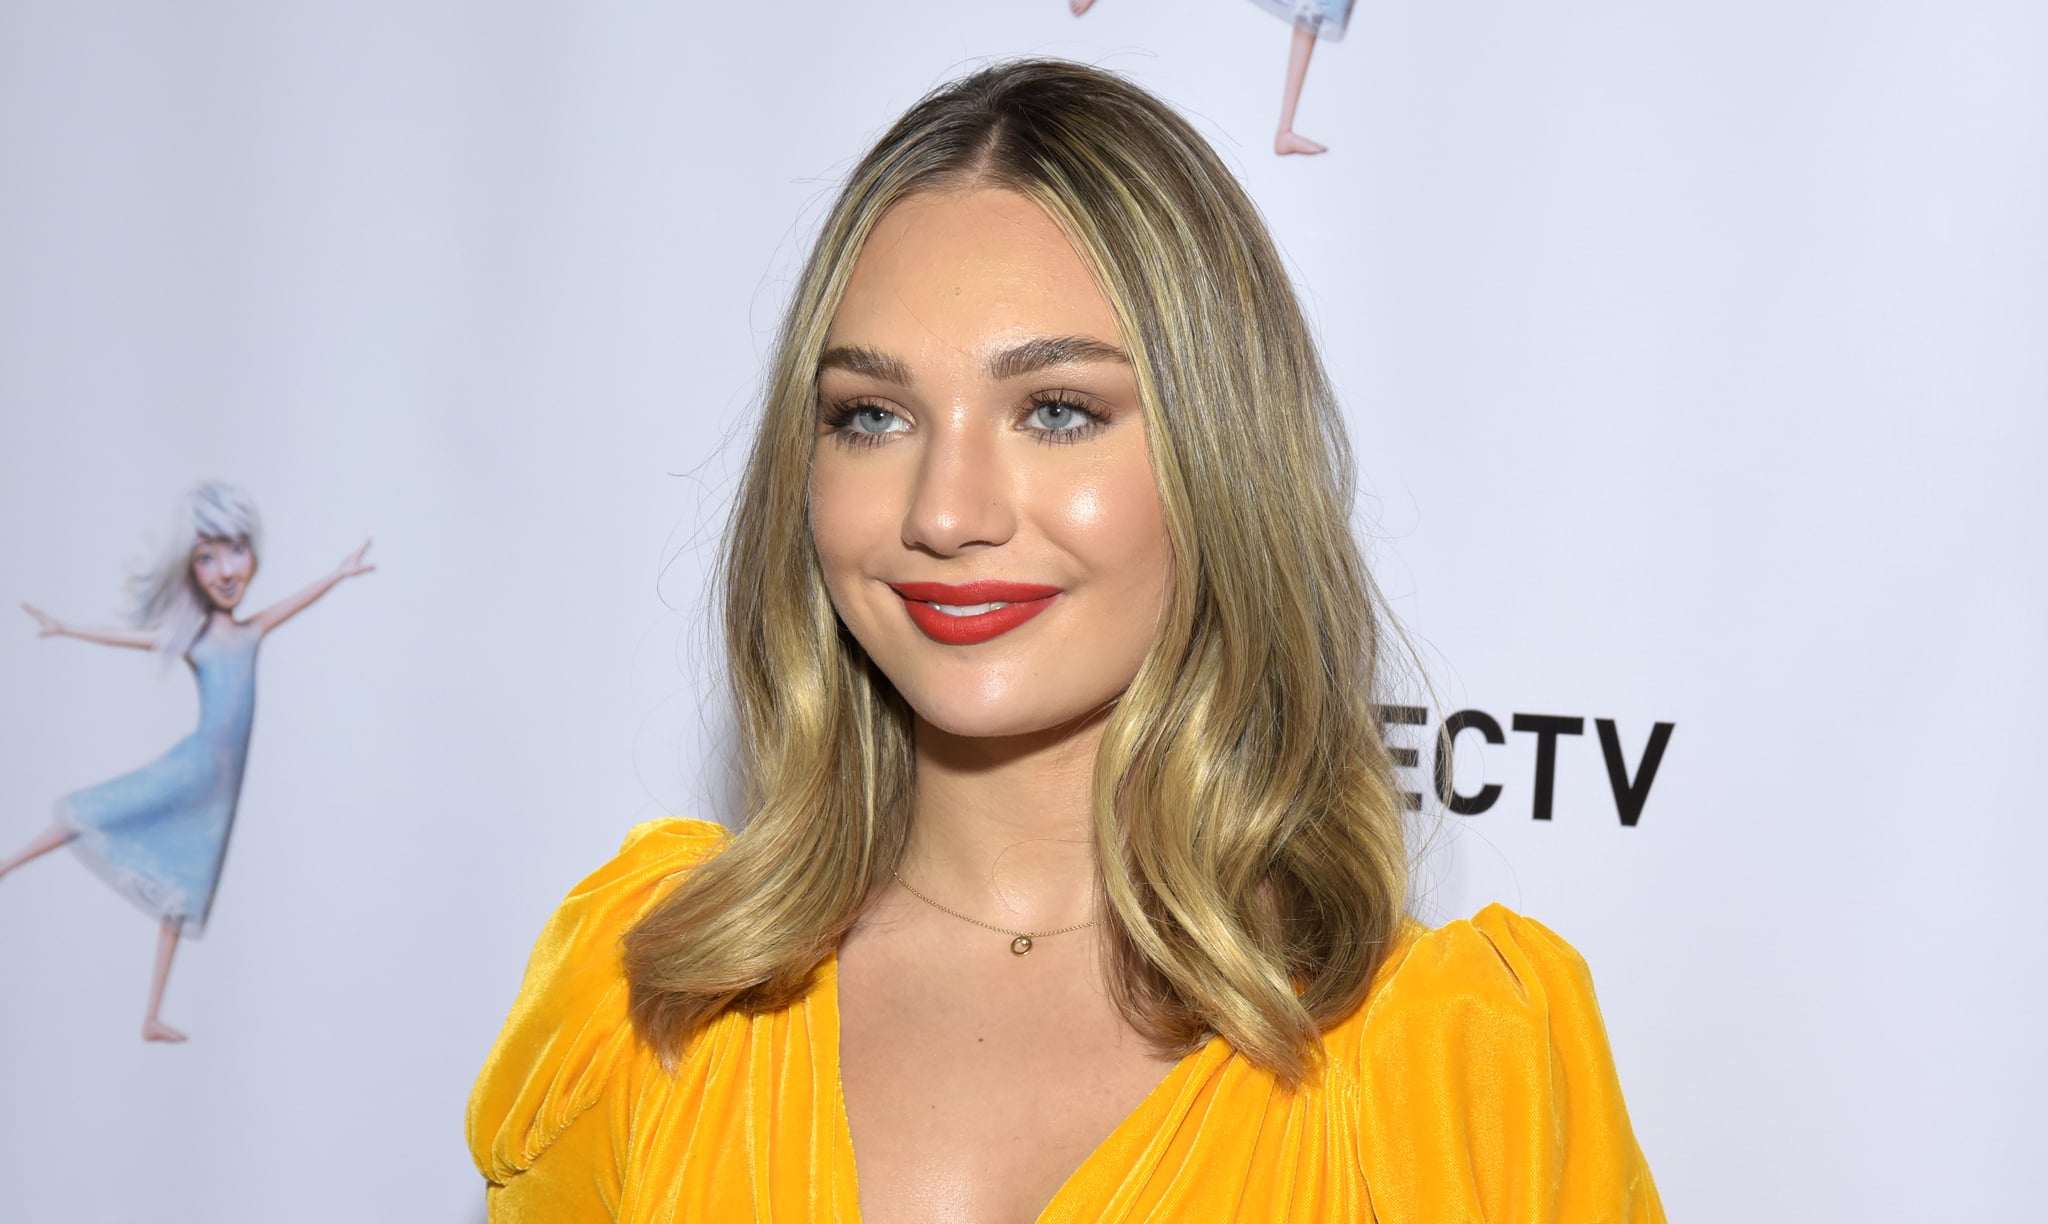 SANTA MONICA, CALIFORNIA - NOVEMBER 16: Actor Maddie Ziegler and attends the Los Angeles premiere of 